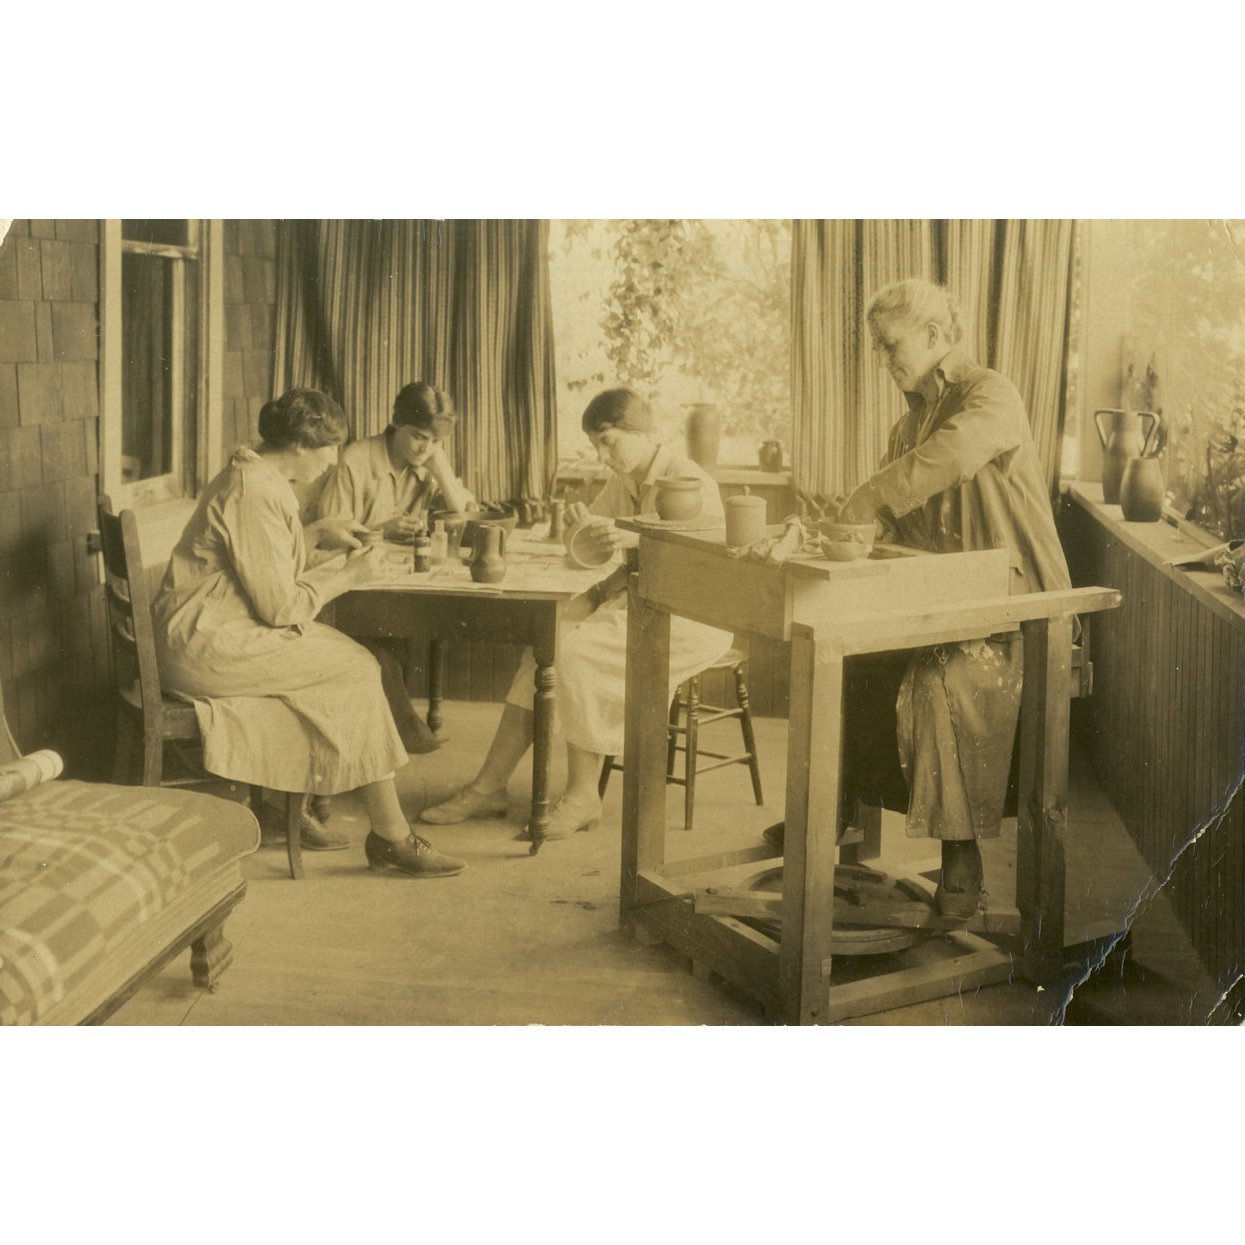 Marion Cartwright, Doris Cordy, Mrs. Eckersley, and Mrs. Croil Sr. working at the Log Cabin pottery studio, 1925